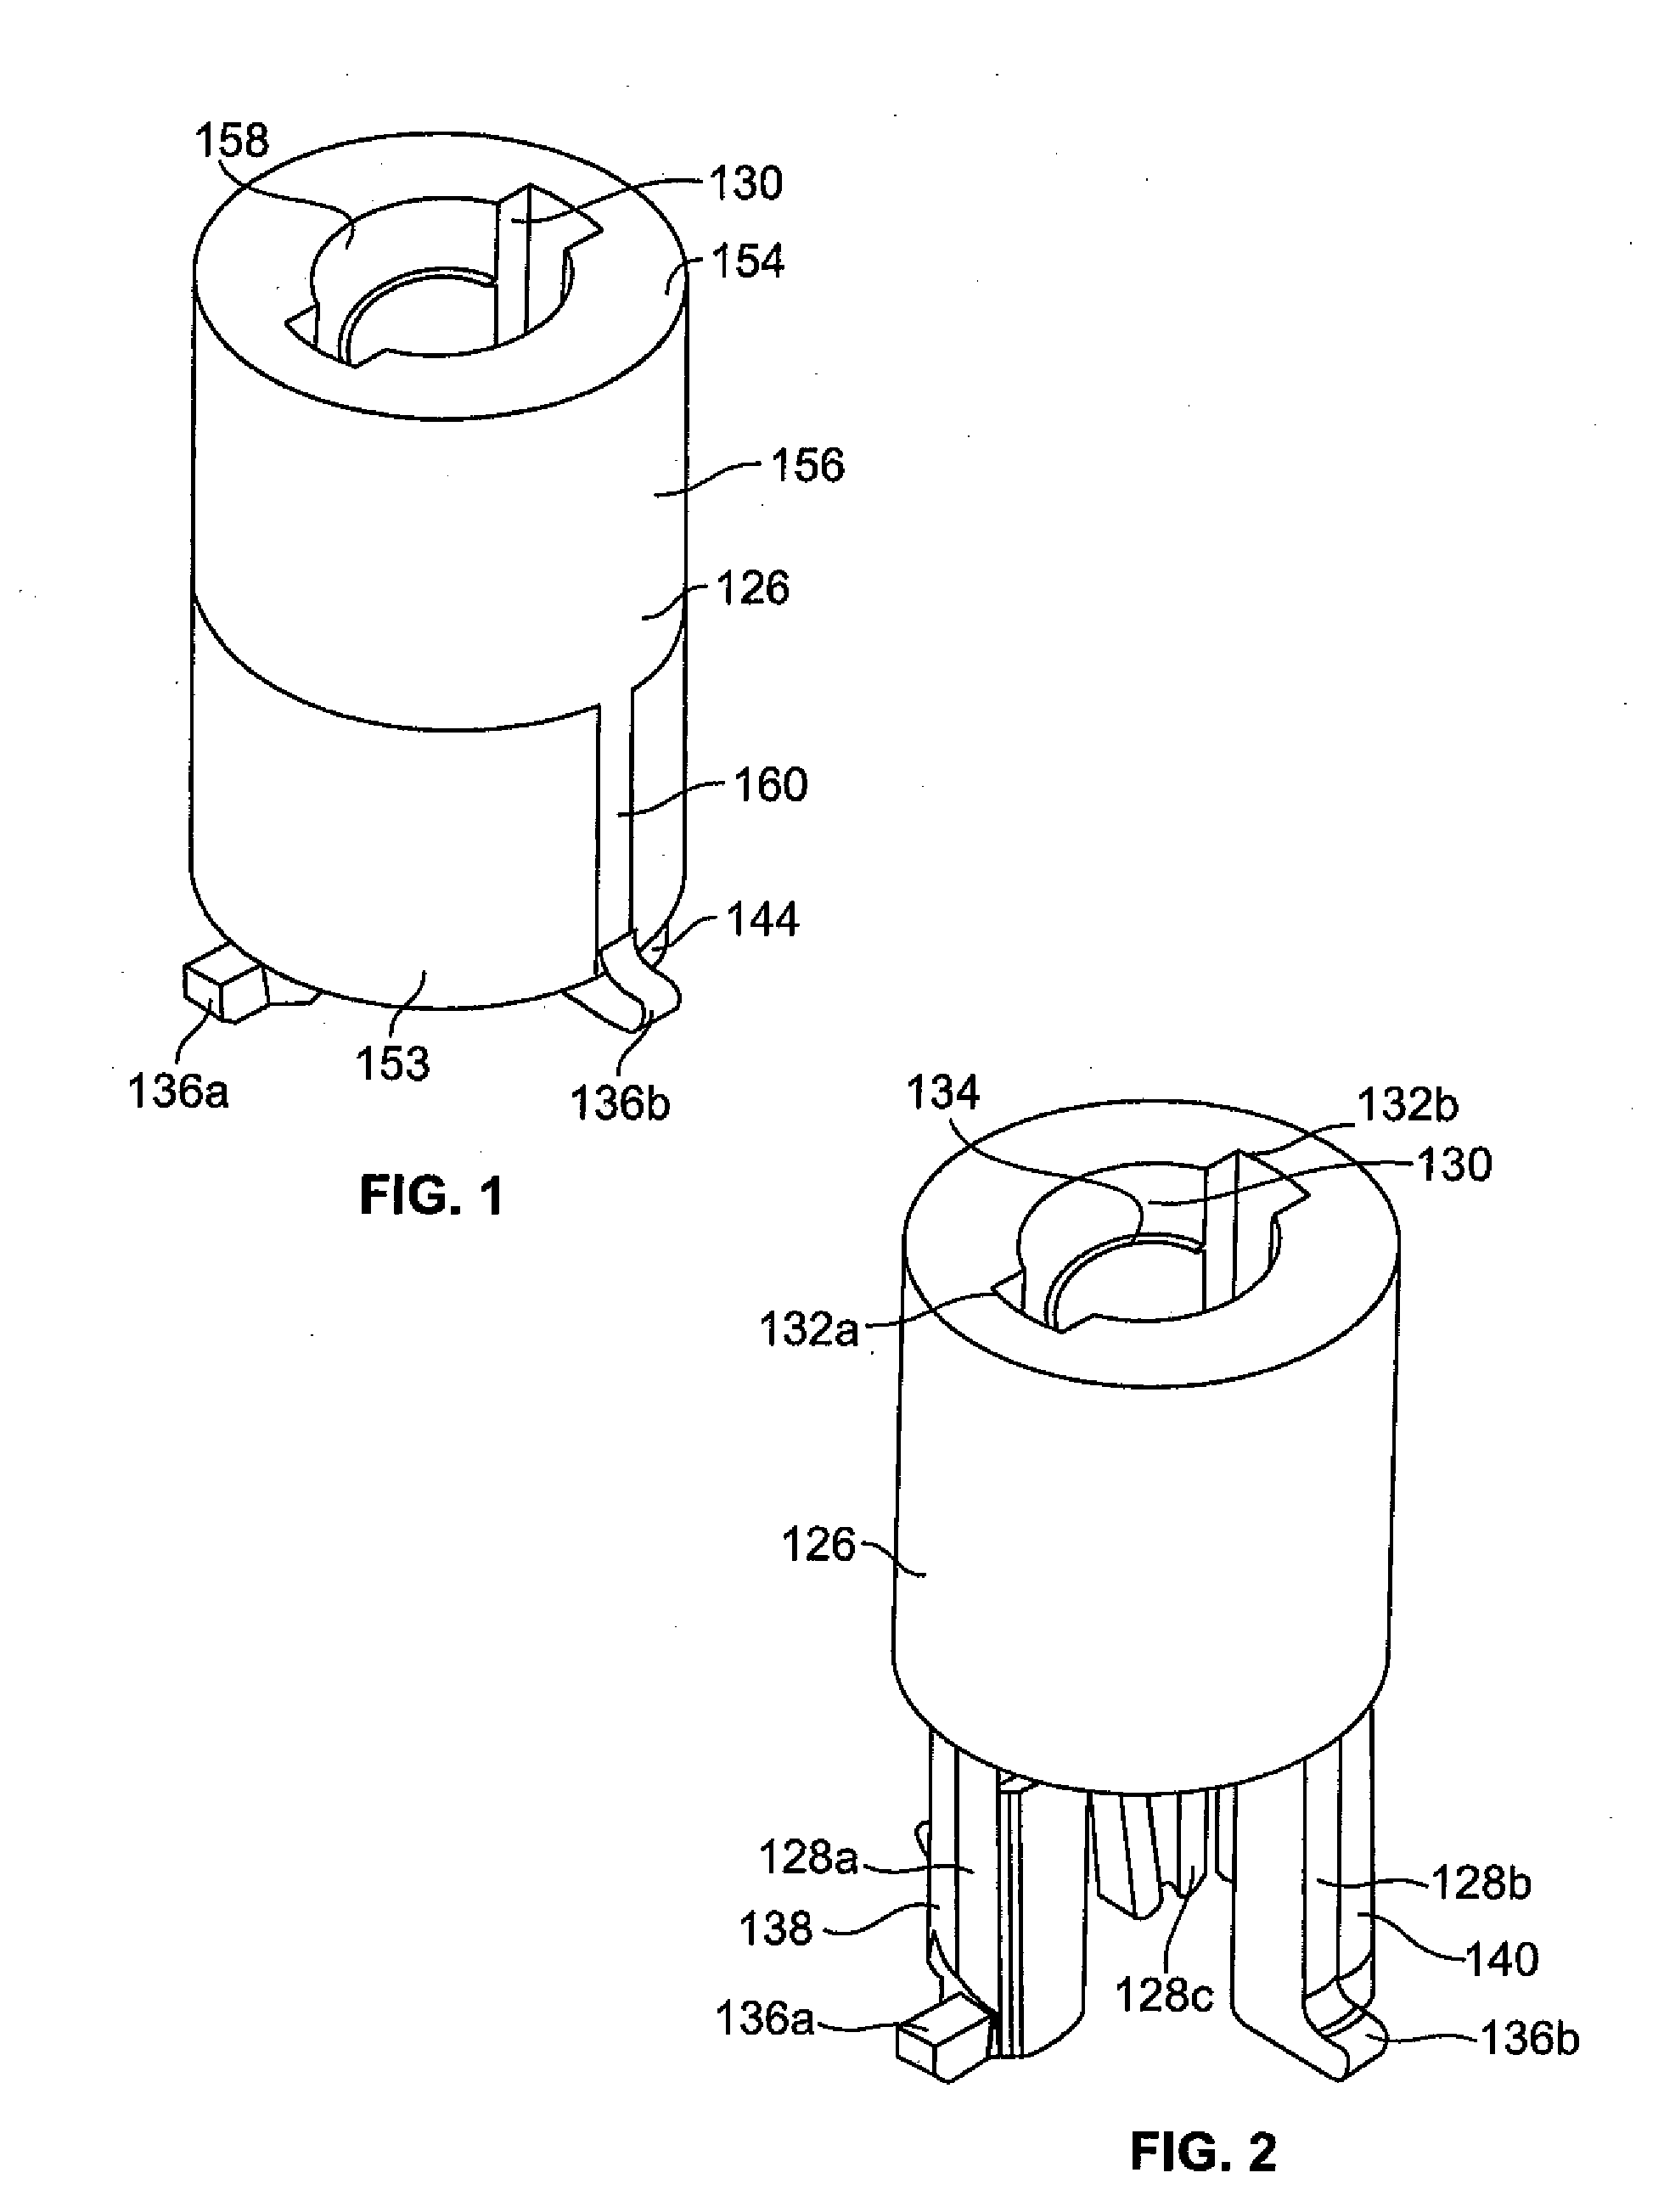 Method of manufacturing an interconnect device which forms a heat sink and electrical connections between a heat generating device and a power source